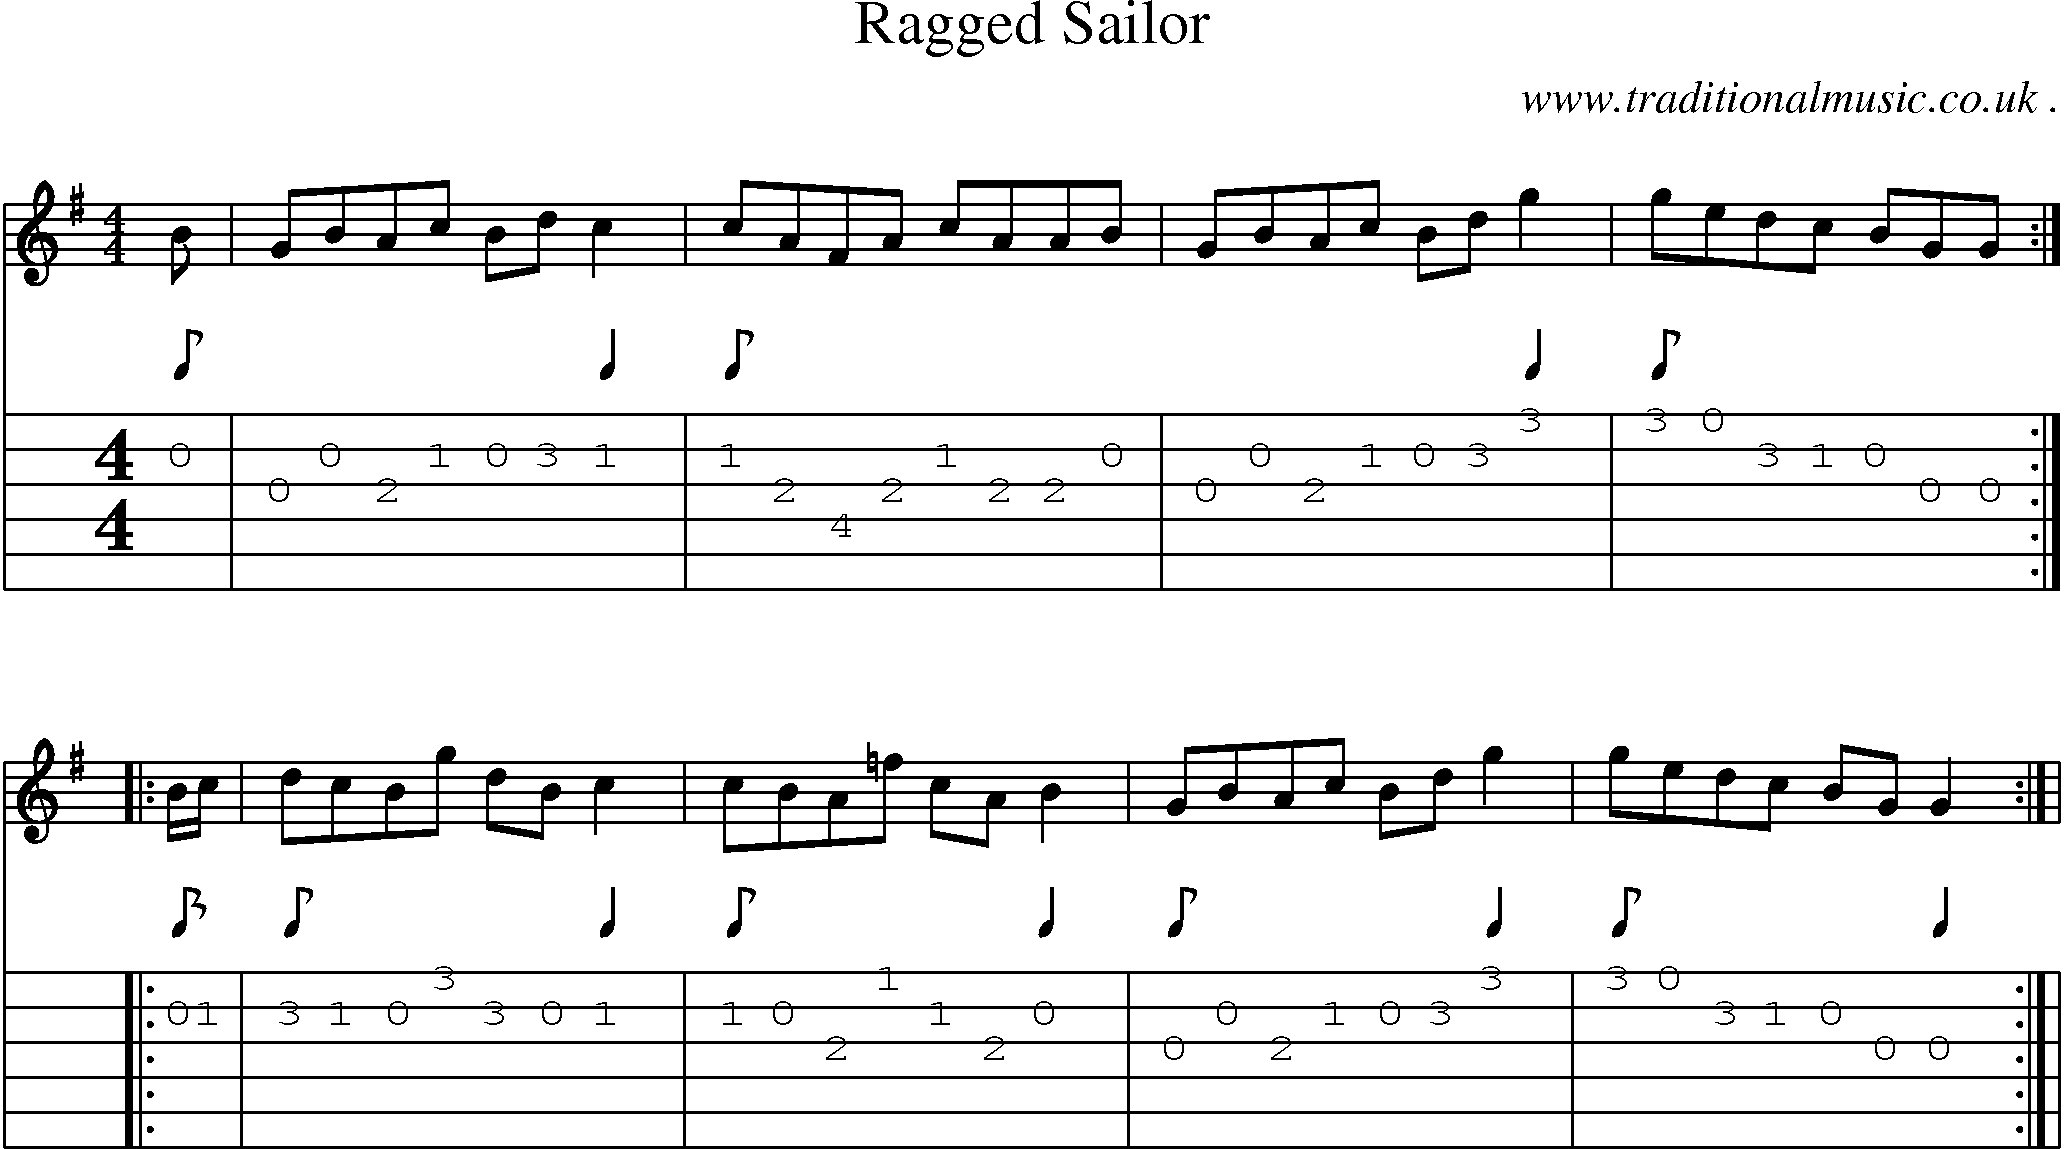 Sheet-Music and Guitar Tabs for Ragged Sailor